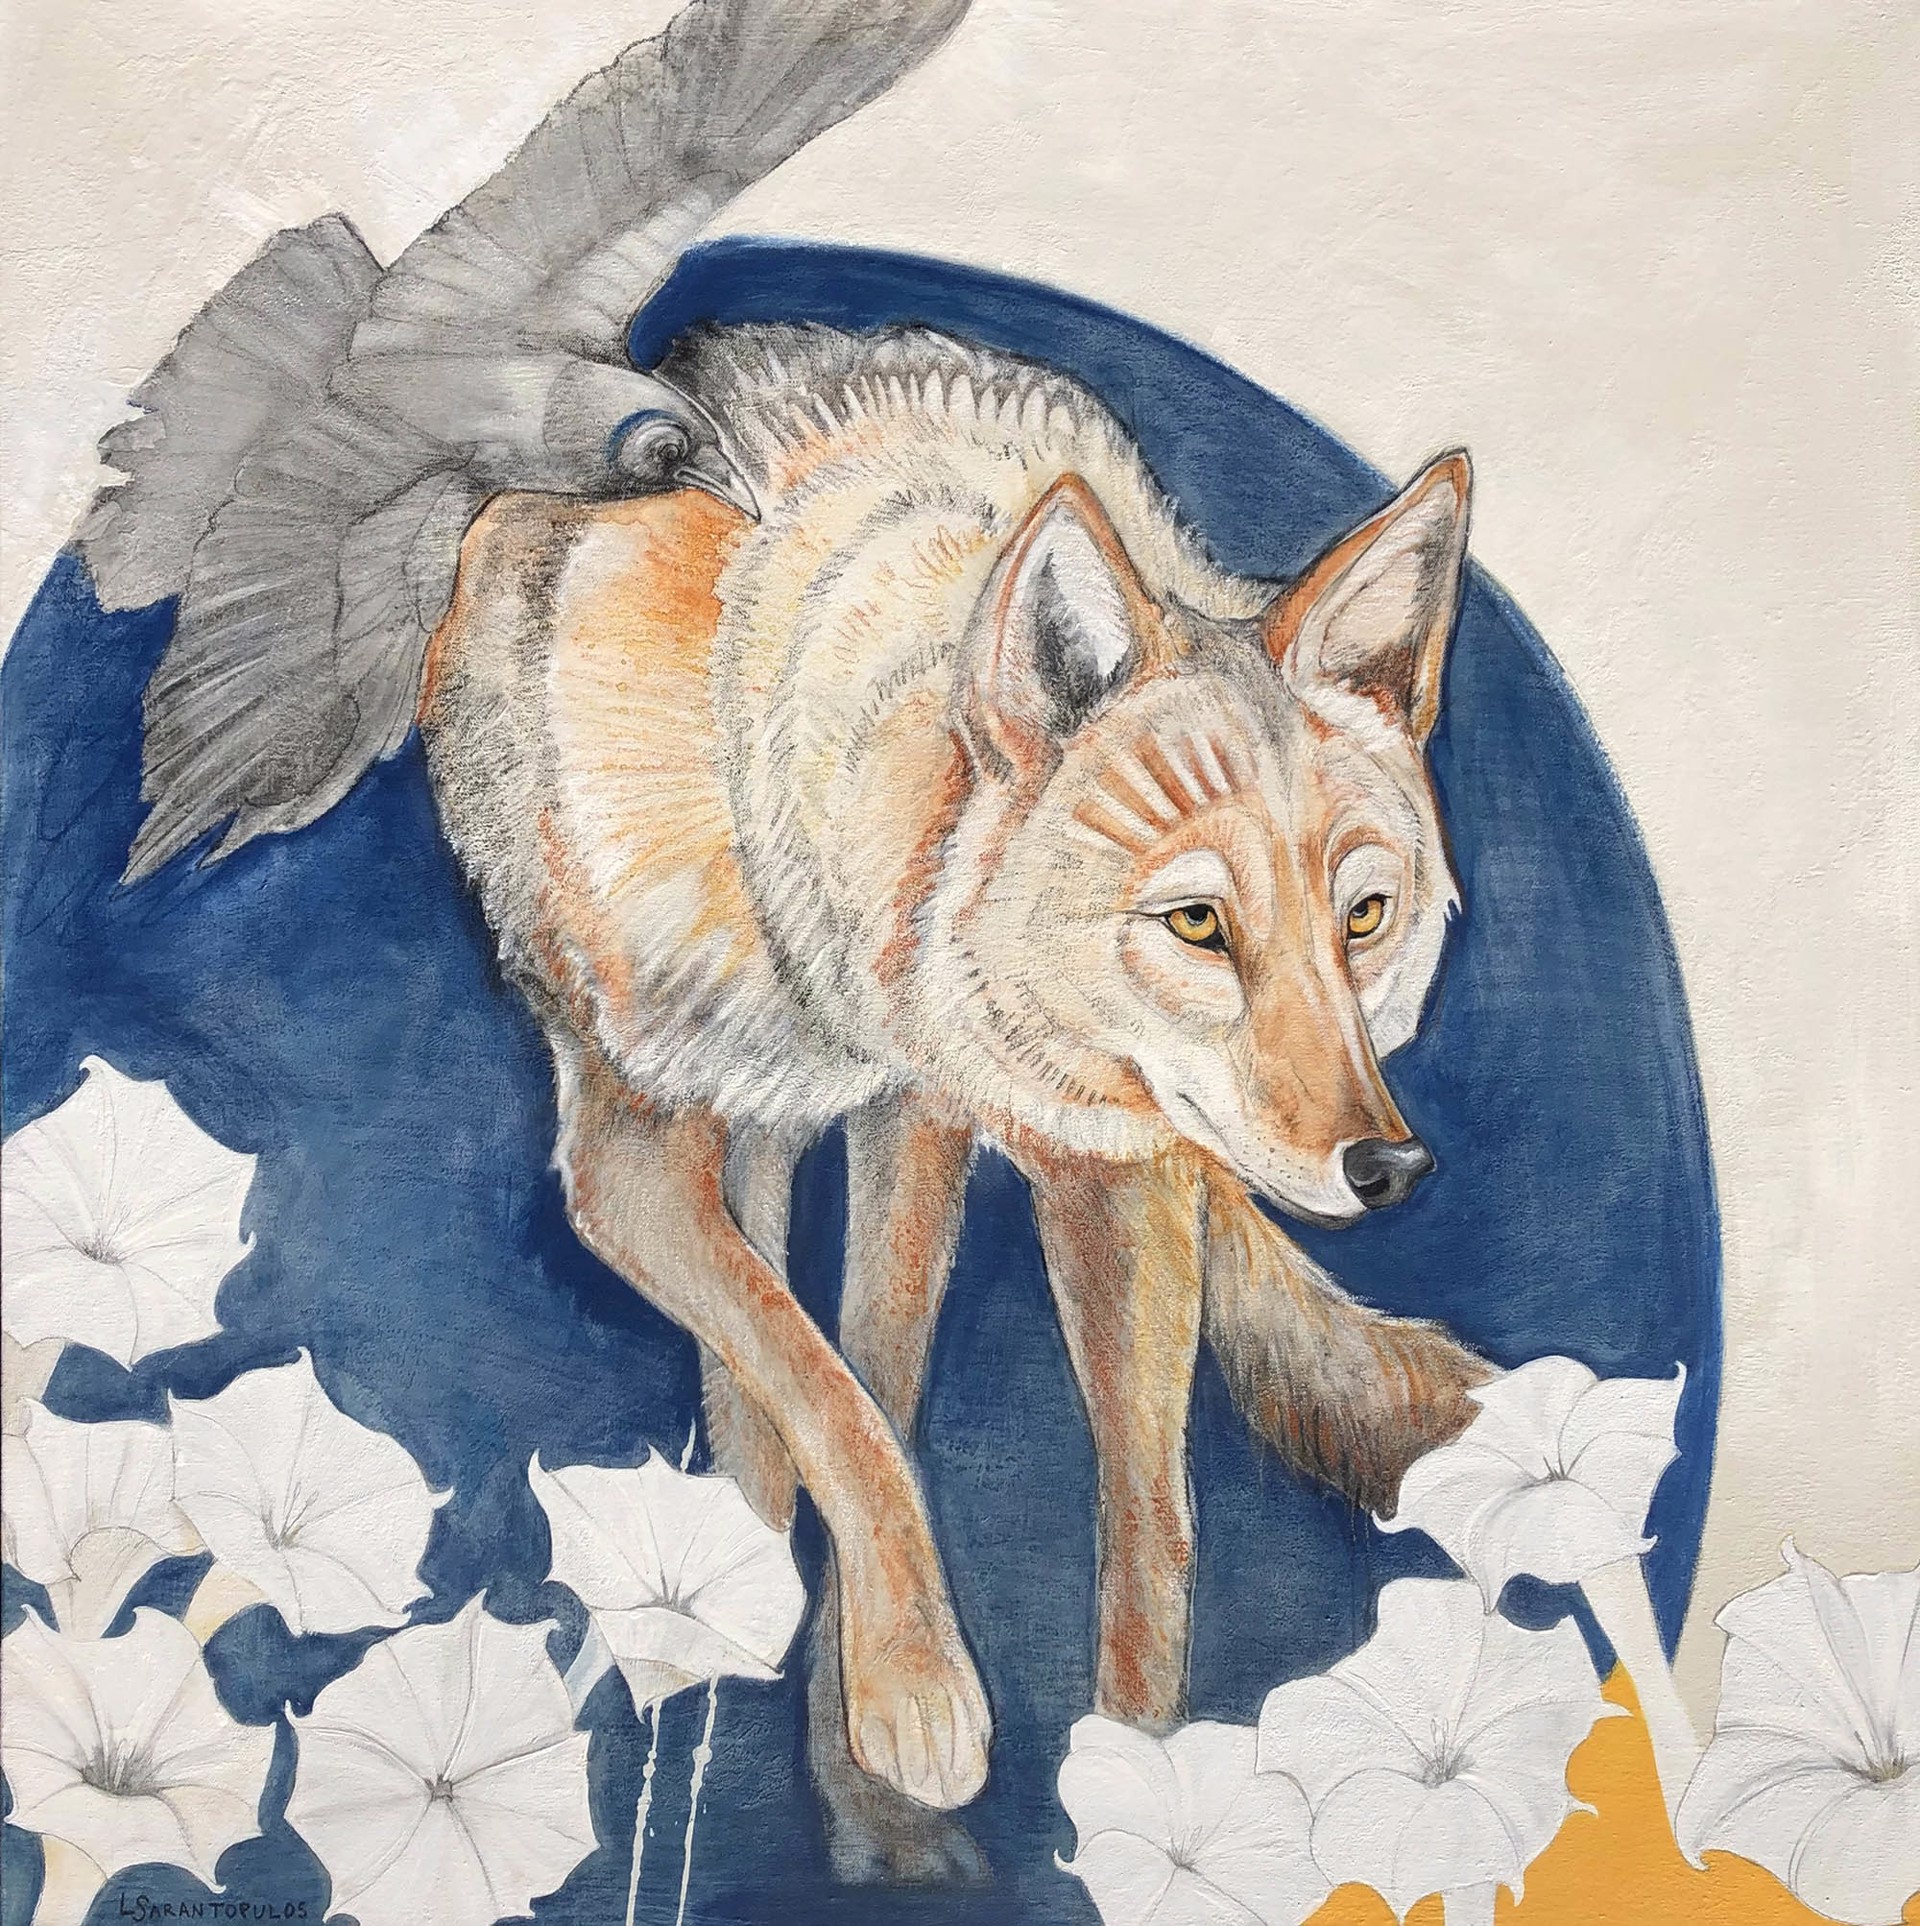 Original Mixed Media Painting Featuring A Fox And Raven Over Abstract Background With Blue Circle And White Flower Details